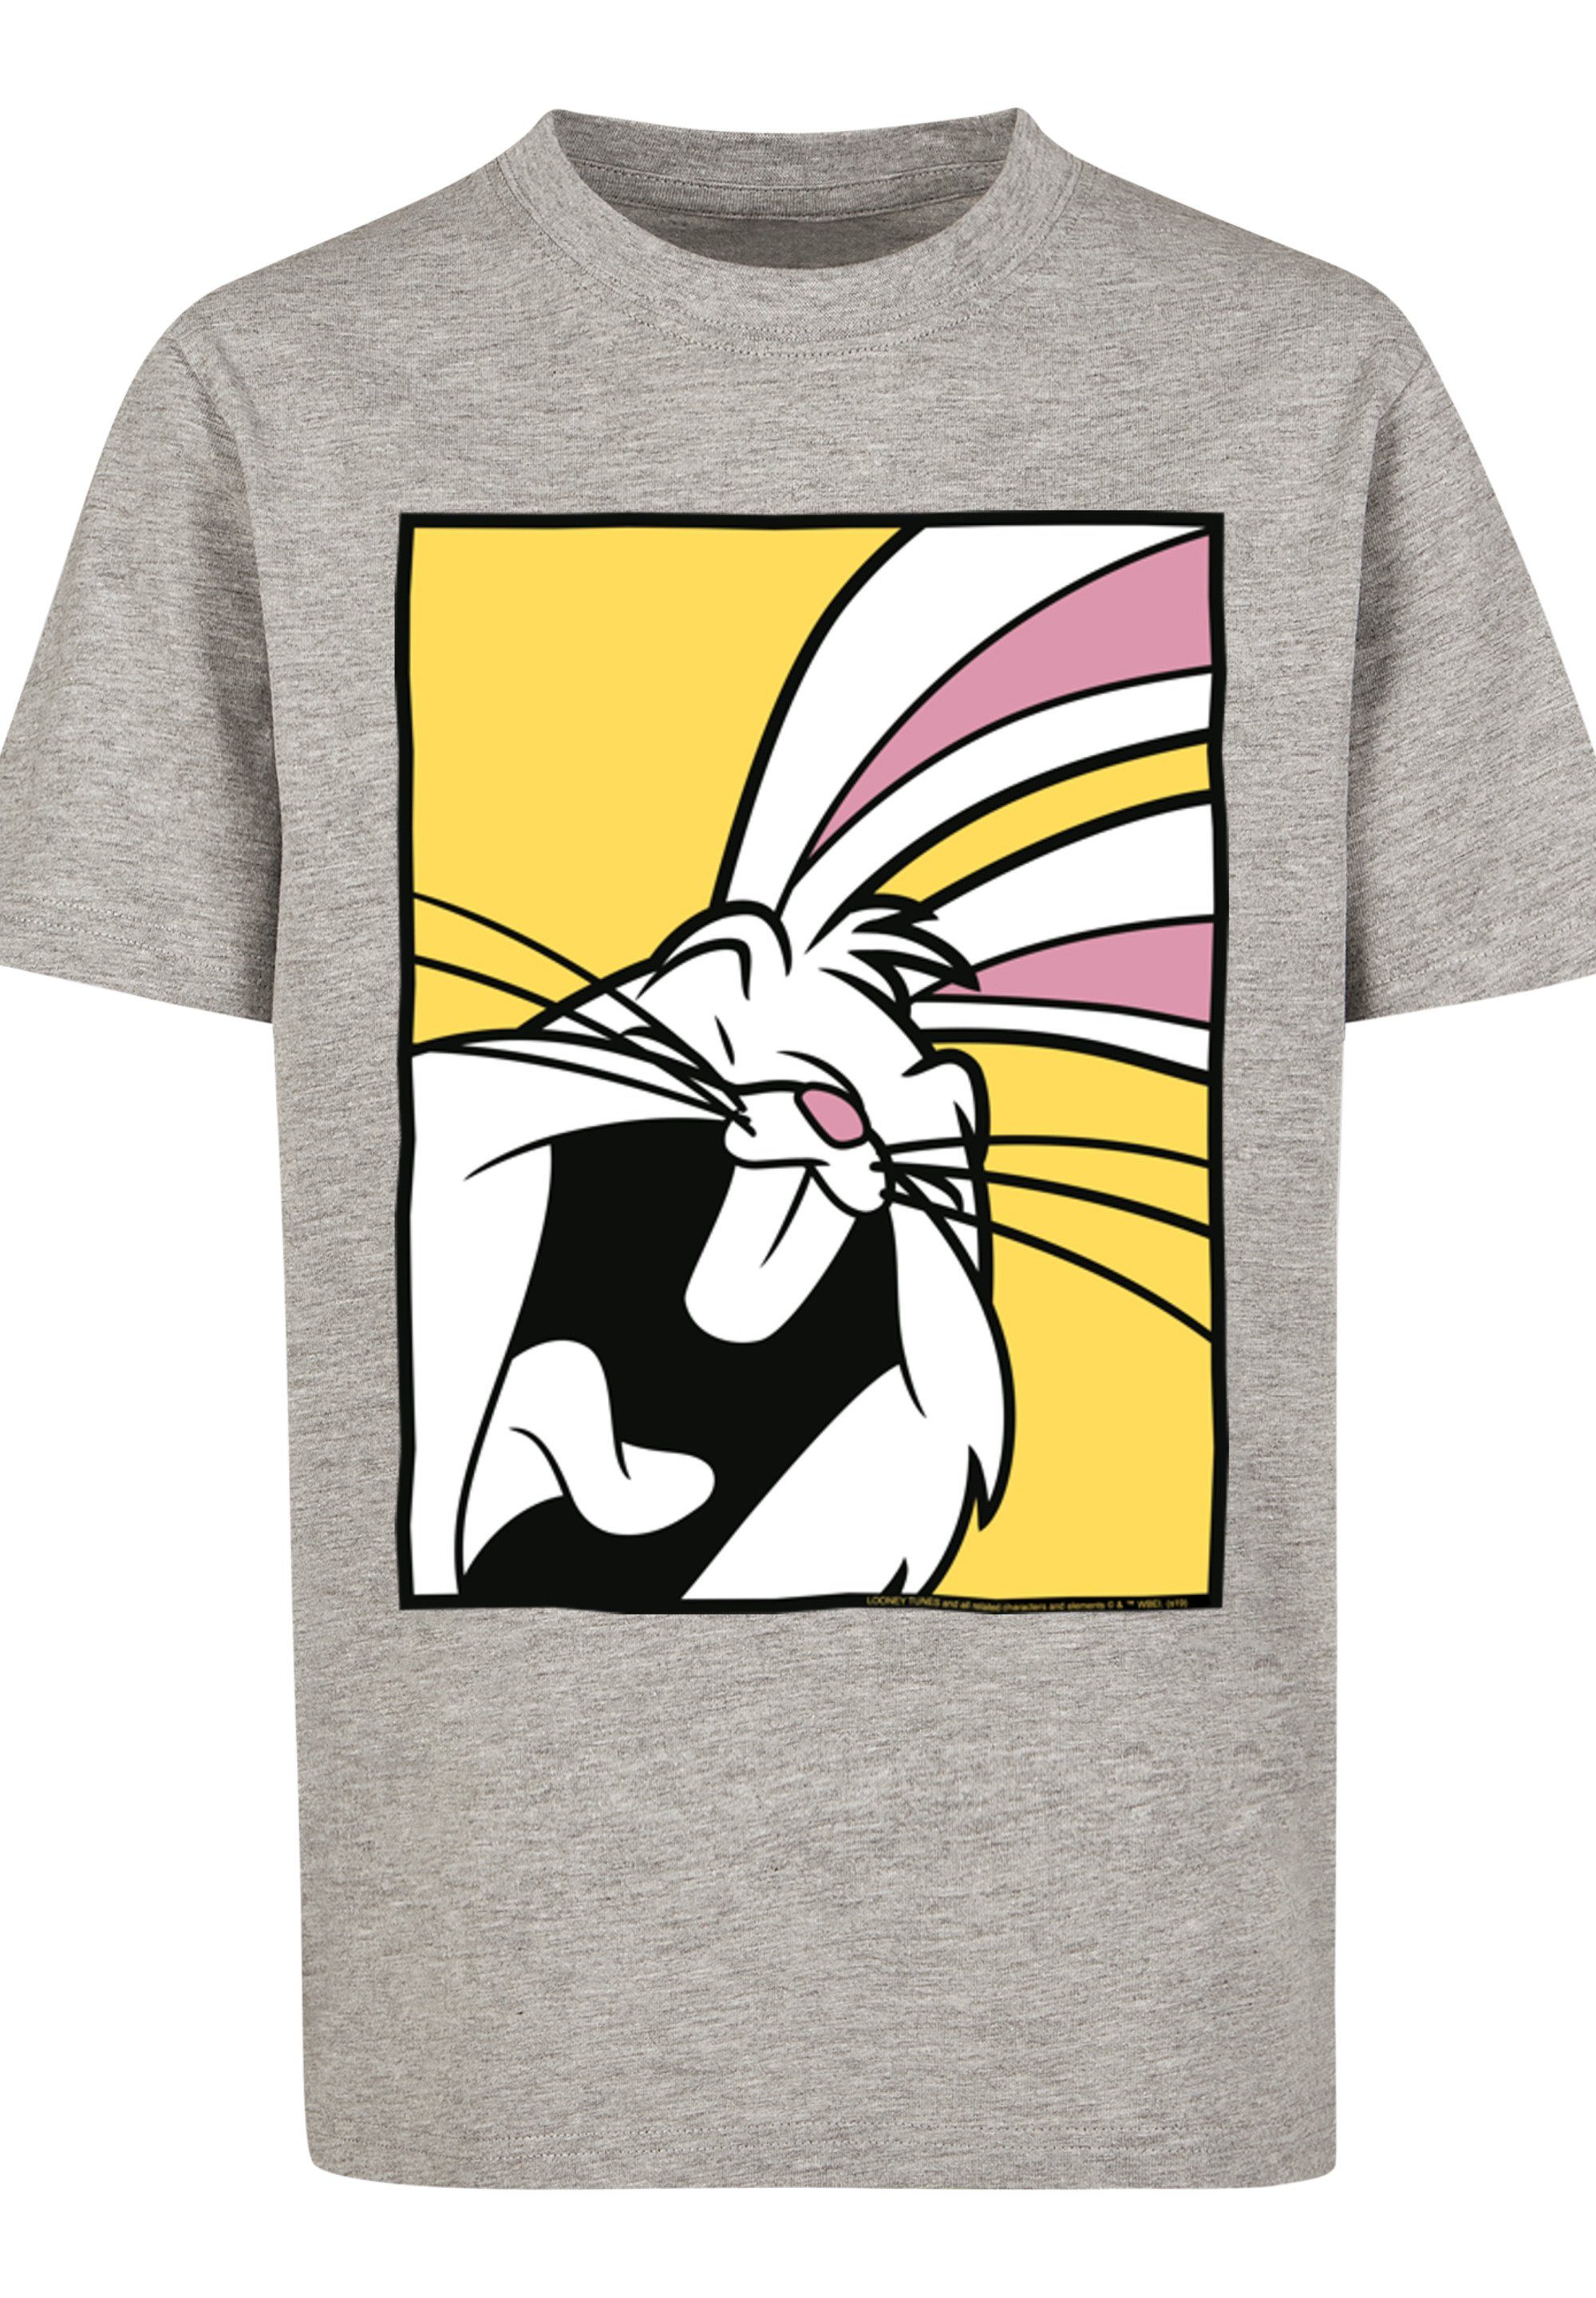 Looney heather T-Shirt Laughing F4NT4STIC Tunes Bugs Bunny grey Print